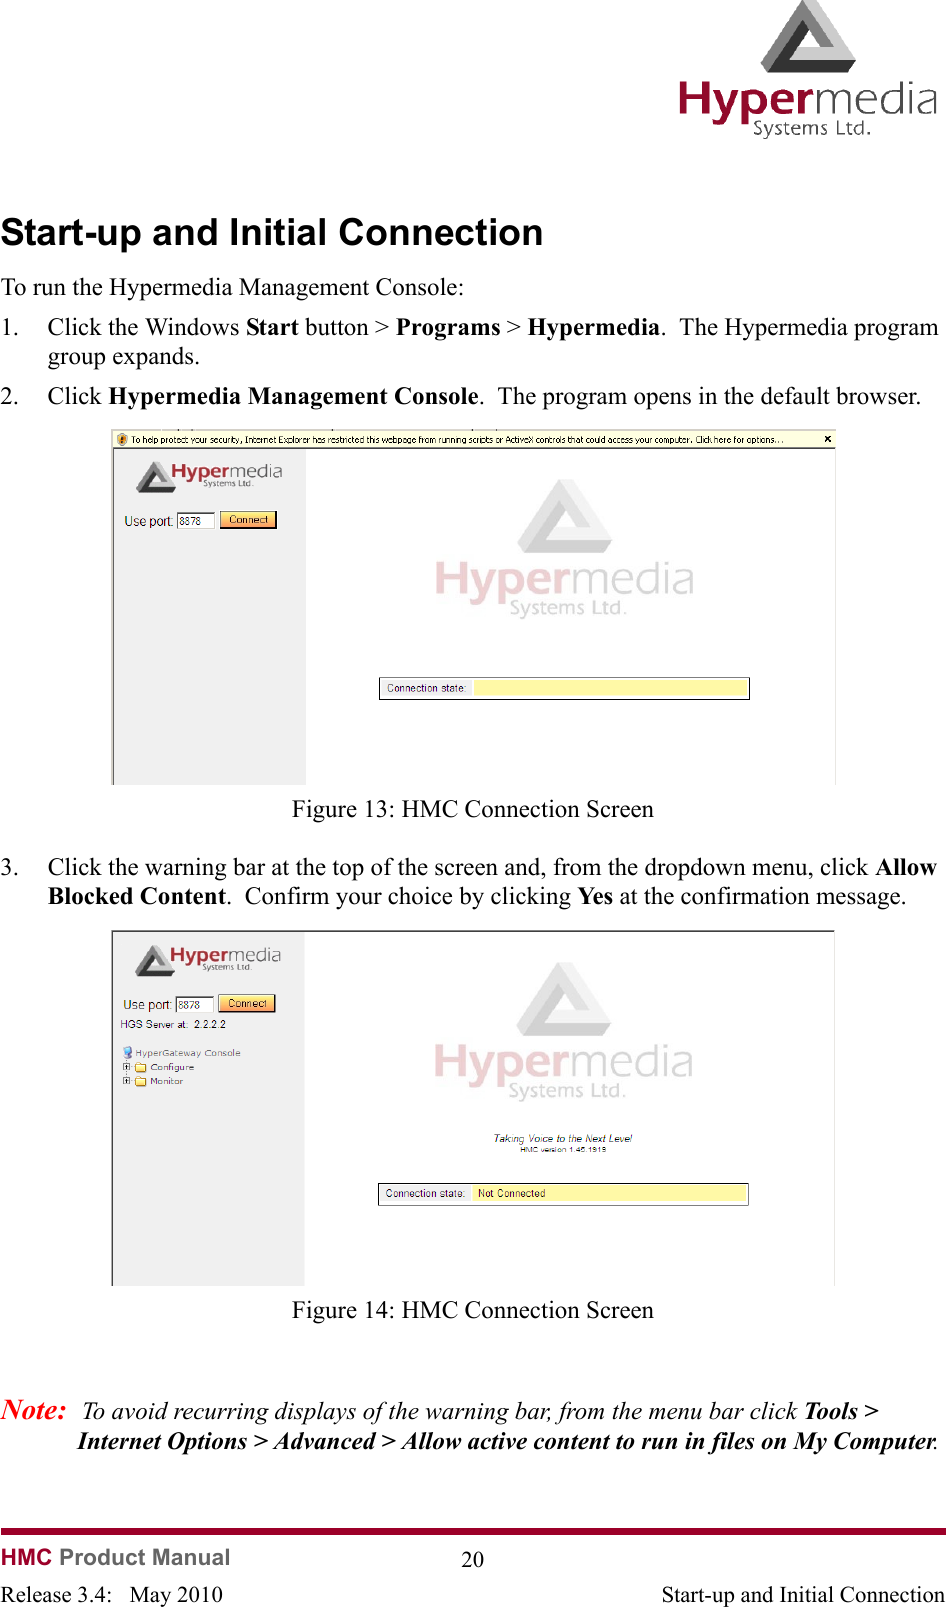   HMC Product Manual  20Release 3.4:   May 2010 Start-up and Initial ConnectionStart-up and Initial ConnectionTo run the Hypermedia Management Console:1. Click the Windows Start button &gt; Programs &gt; Hypermedia.  The Hypermedia program group expands.2. Click Hypermedia Management Console.  The program opens in the default browser.               Figure 13: HMC Connection Screen3. Click the warning bar at the top of the screen and, from the dropdown menu, click Allow Blocked Content.  Confirm your choice by clicking Ye s  at the confirmation message.              Figure 14: HMC Connection ScreenNote:  To avoid recurring displays of the warning bar, from the menu bar click Tools &gt; Internet Options &gt; Advanced &gt; Allow active content to run in files on My Computer. 